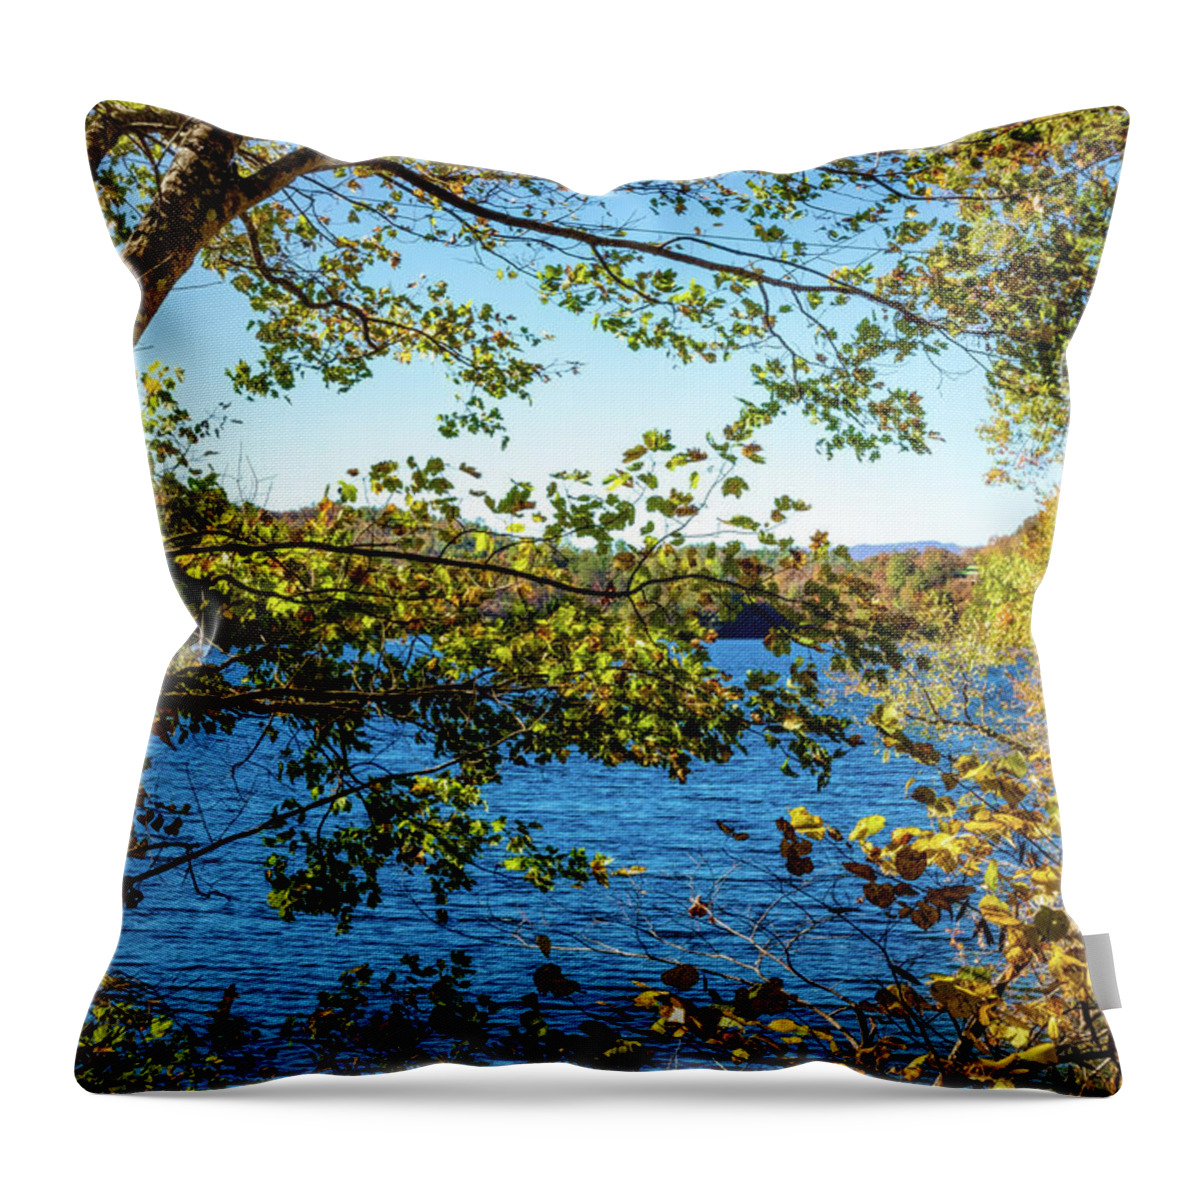 Carolina Throw Pillow featuring the photograph Lakeview by Debra and Dave Vanderlaan